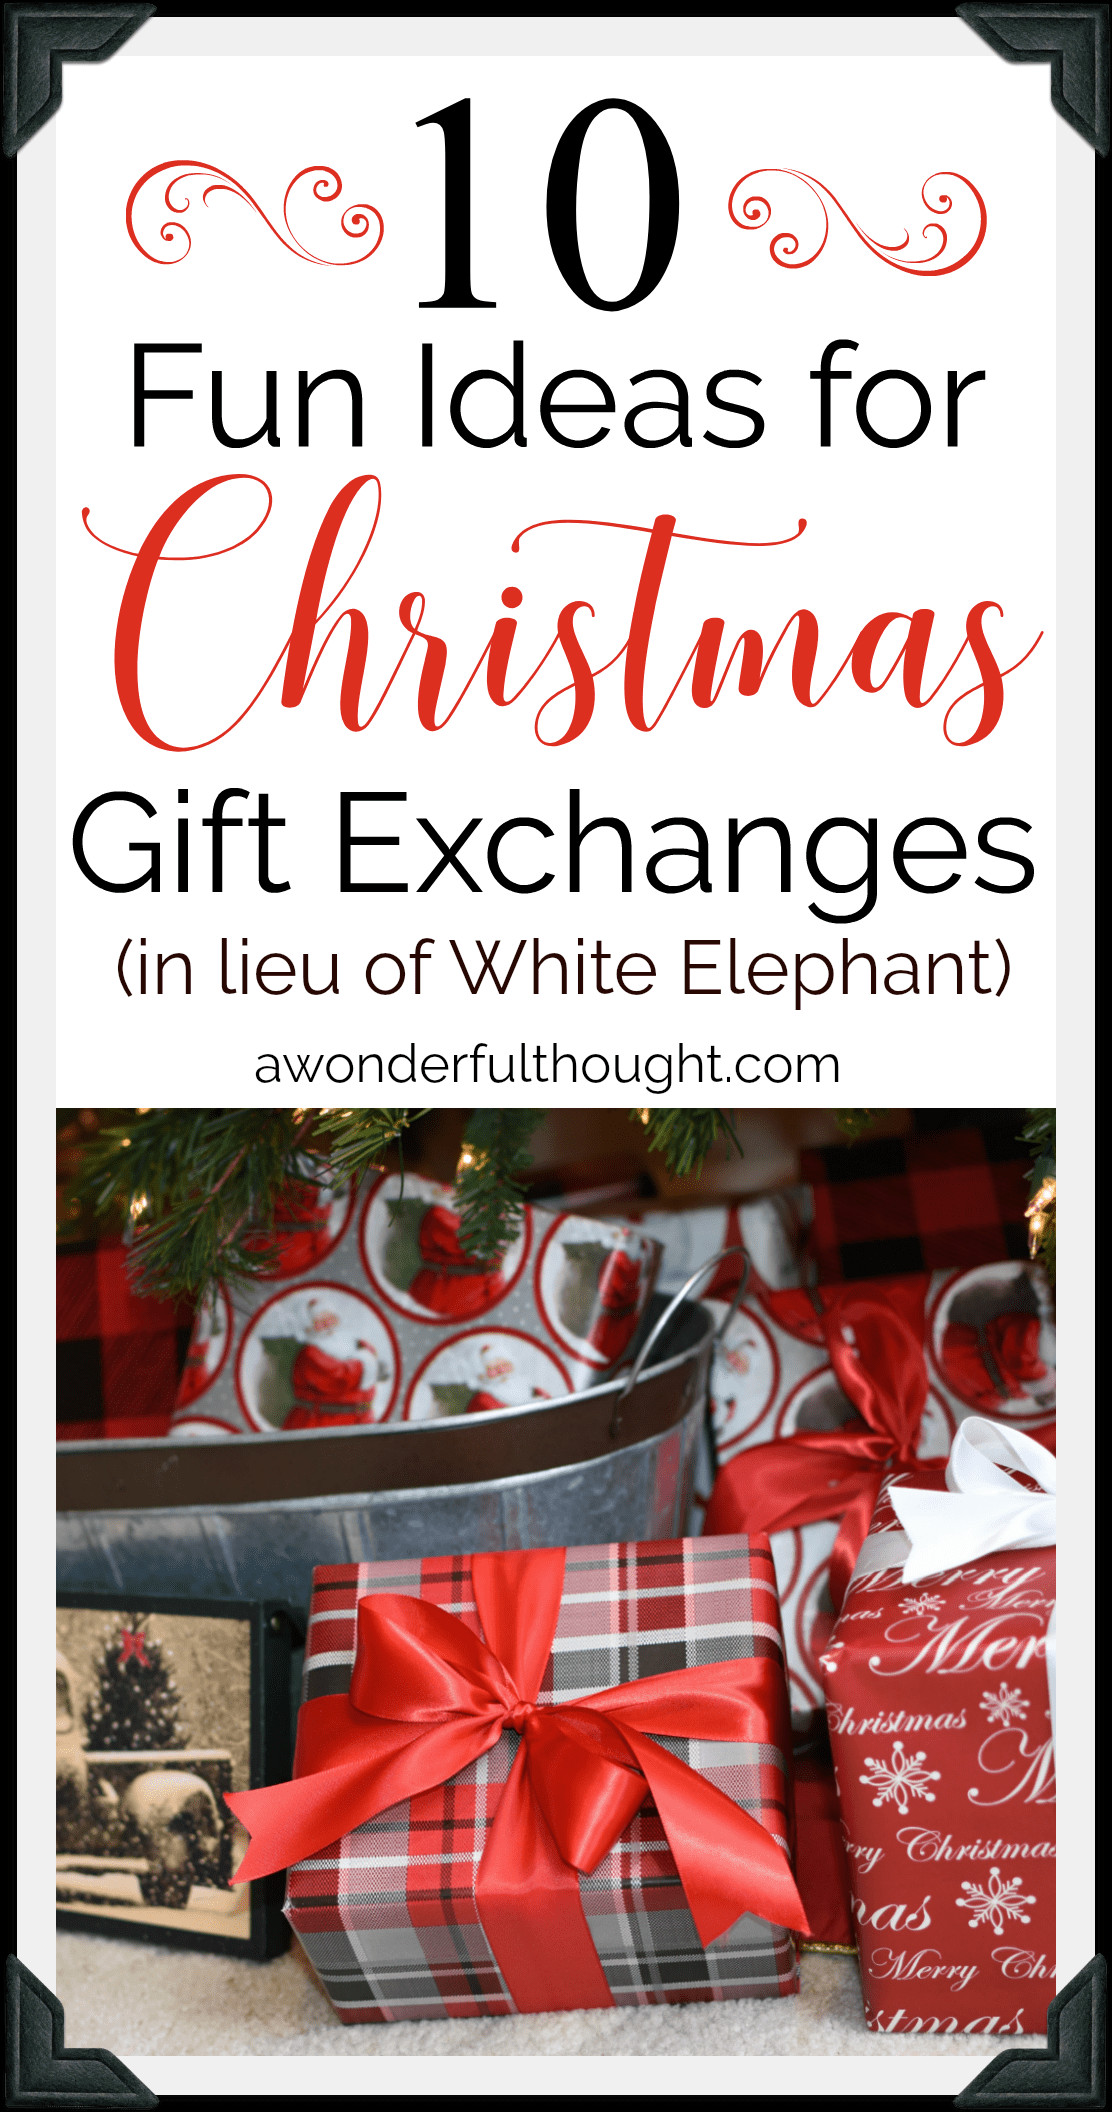 Christmas Gift Exchange Gift Ideas
 Christmas Gift Exchange Ideas A Wonderful Thought